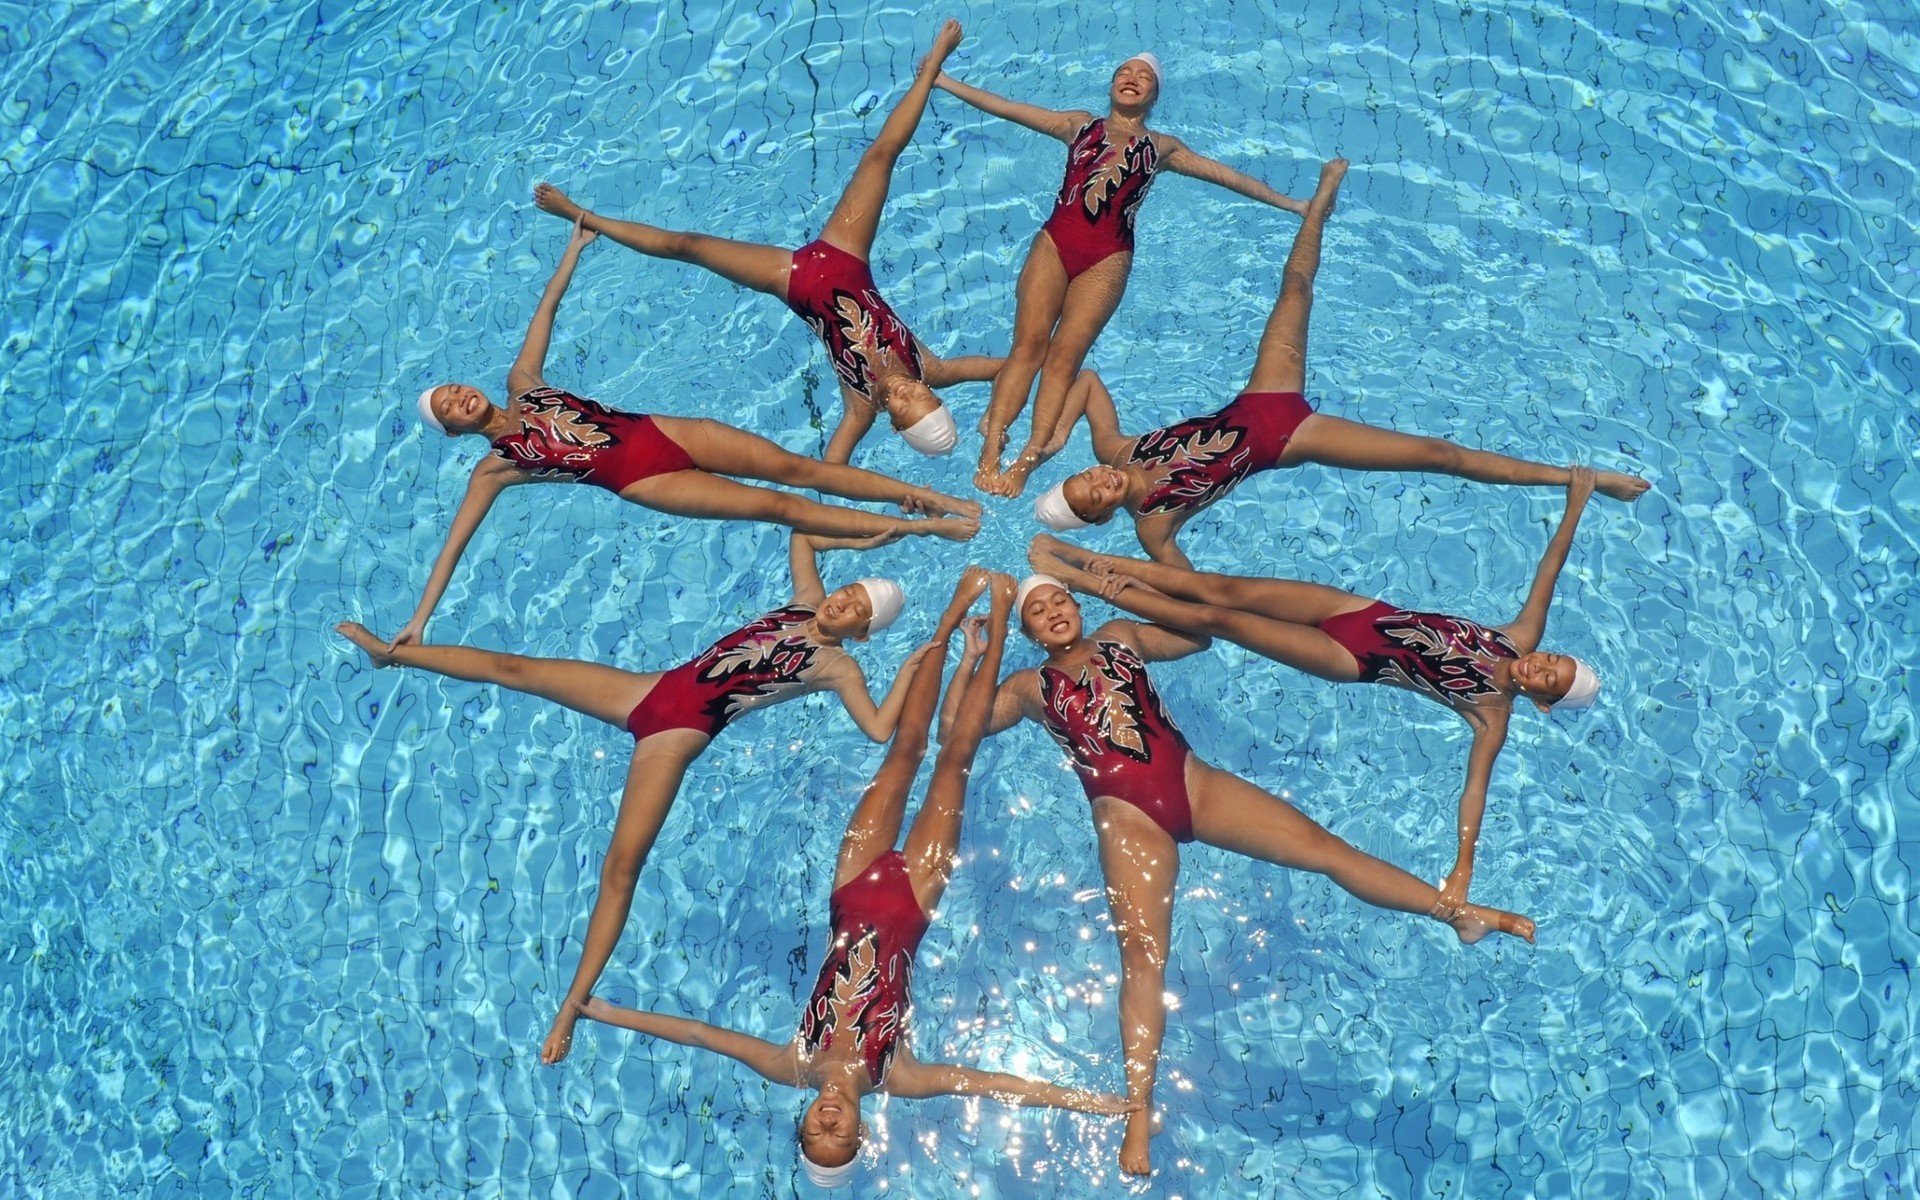 swimming-synchronised-swimming-london-2012-olympics-pool-water-sports